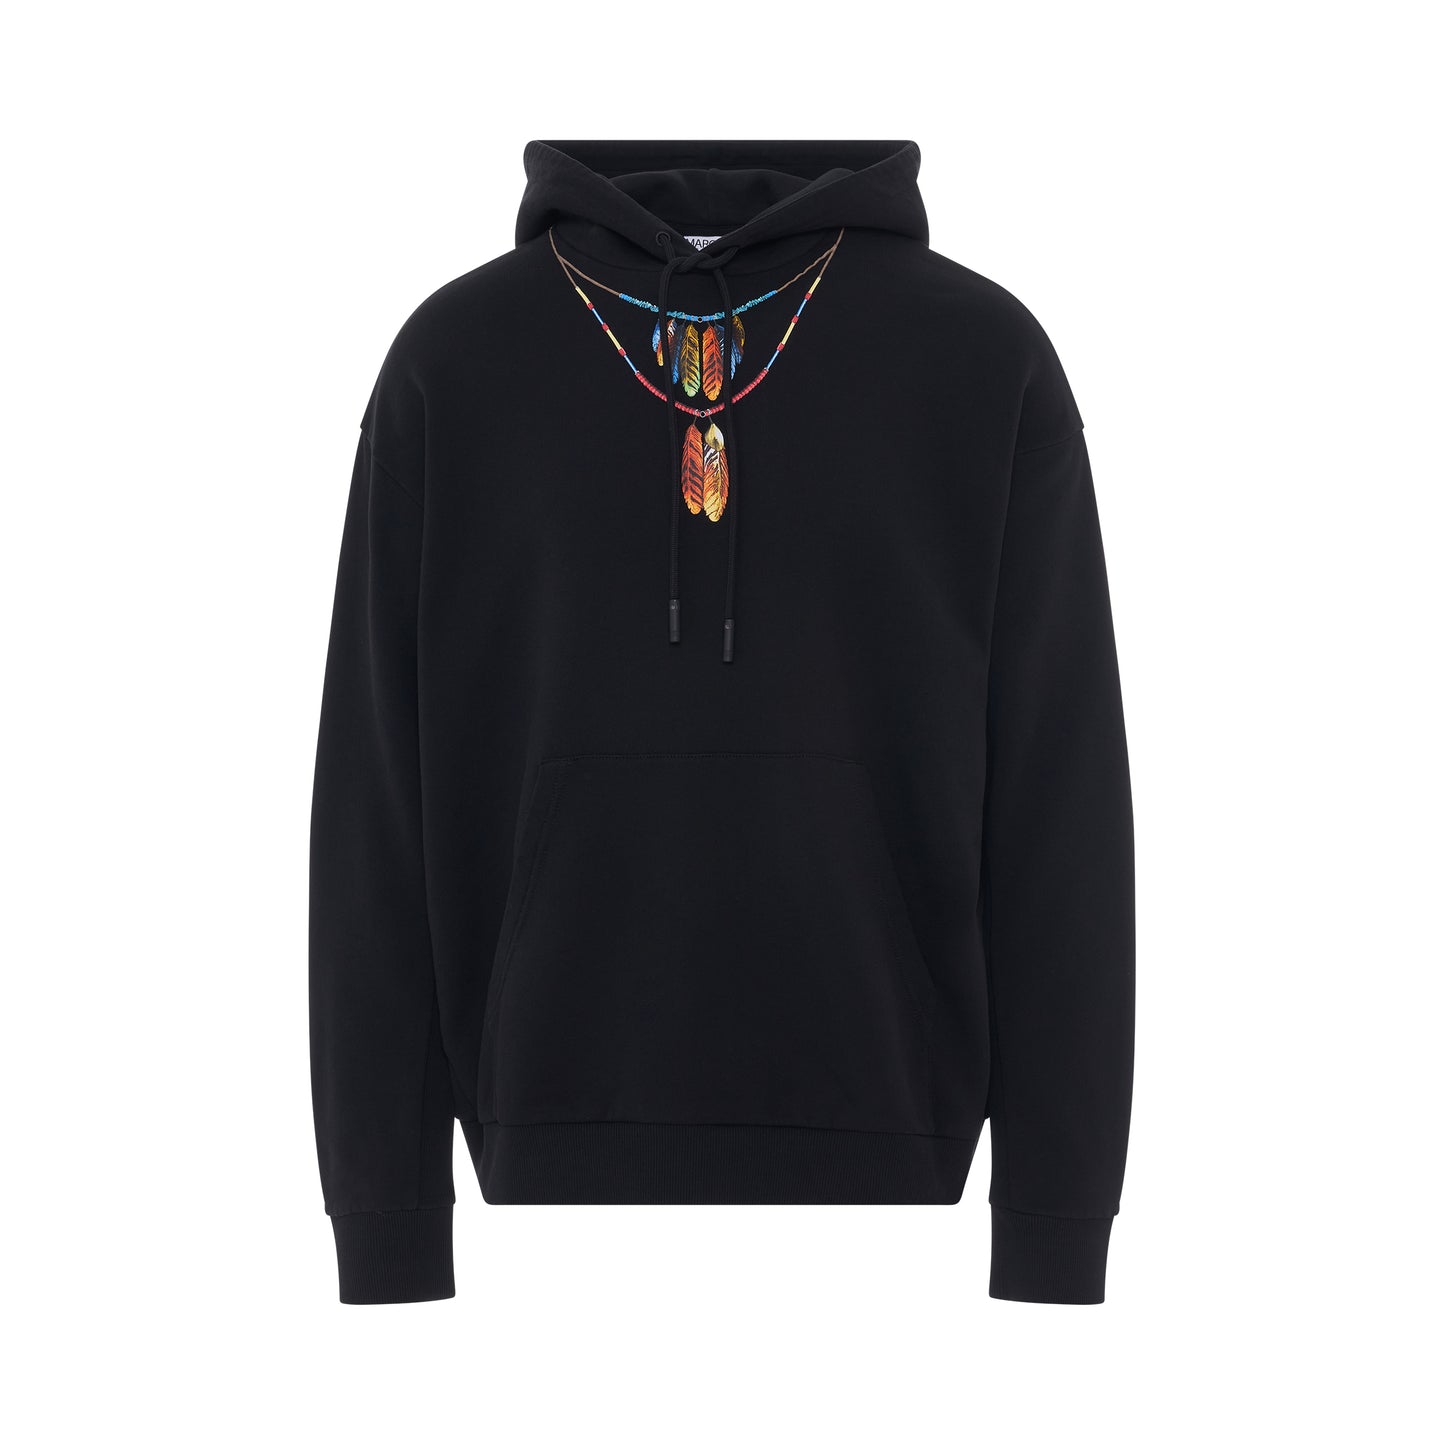 Feathers Necklace Oversized Hoodie in Black